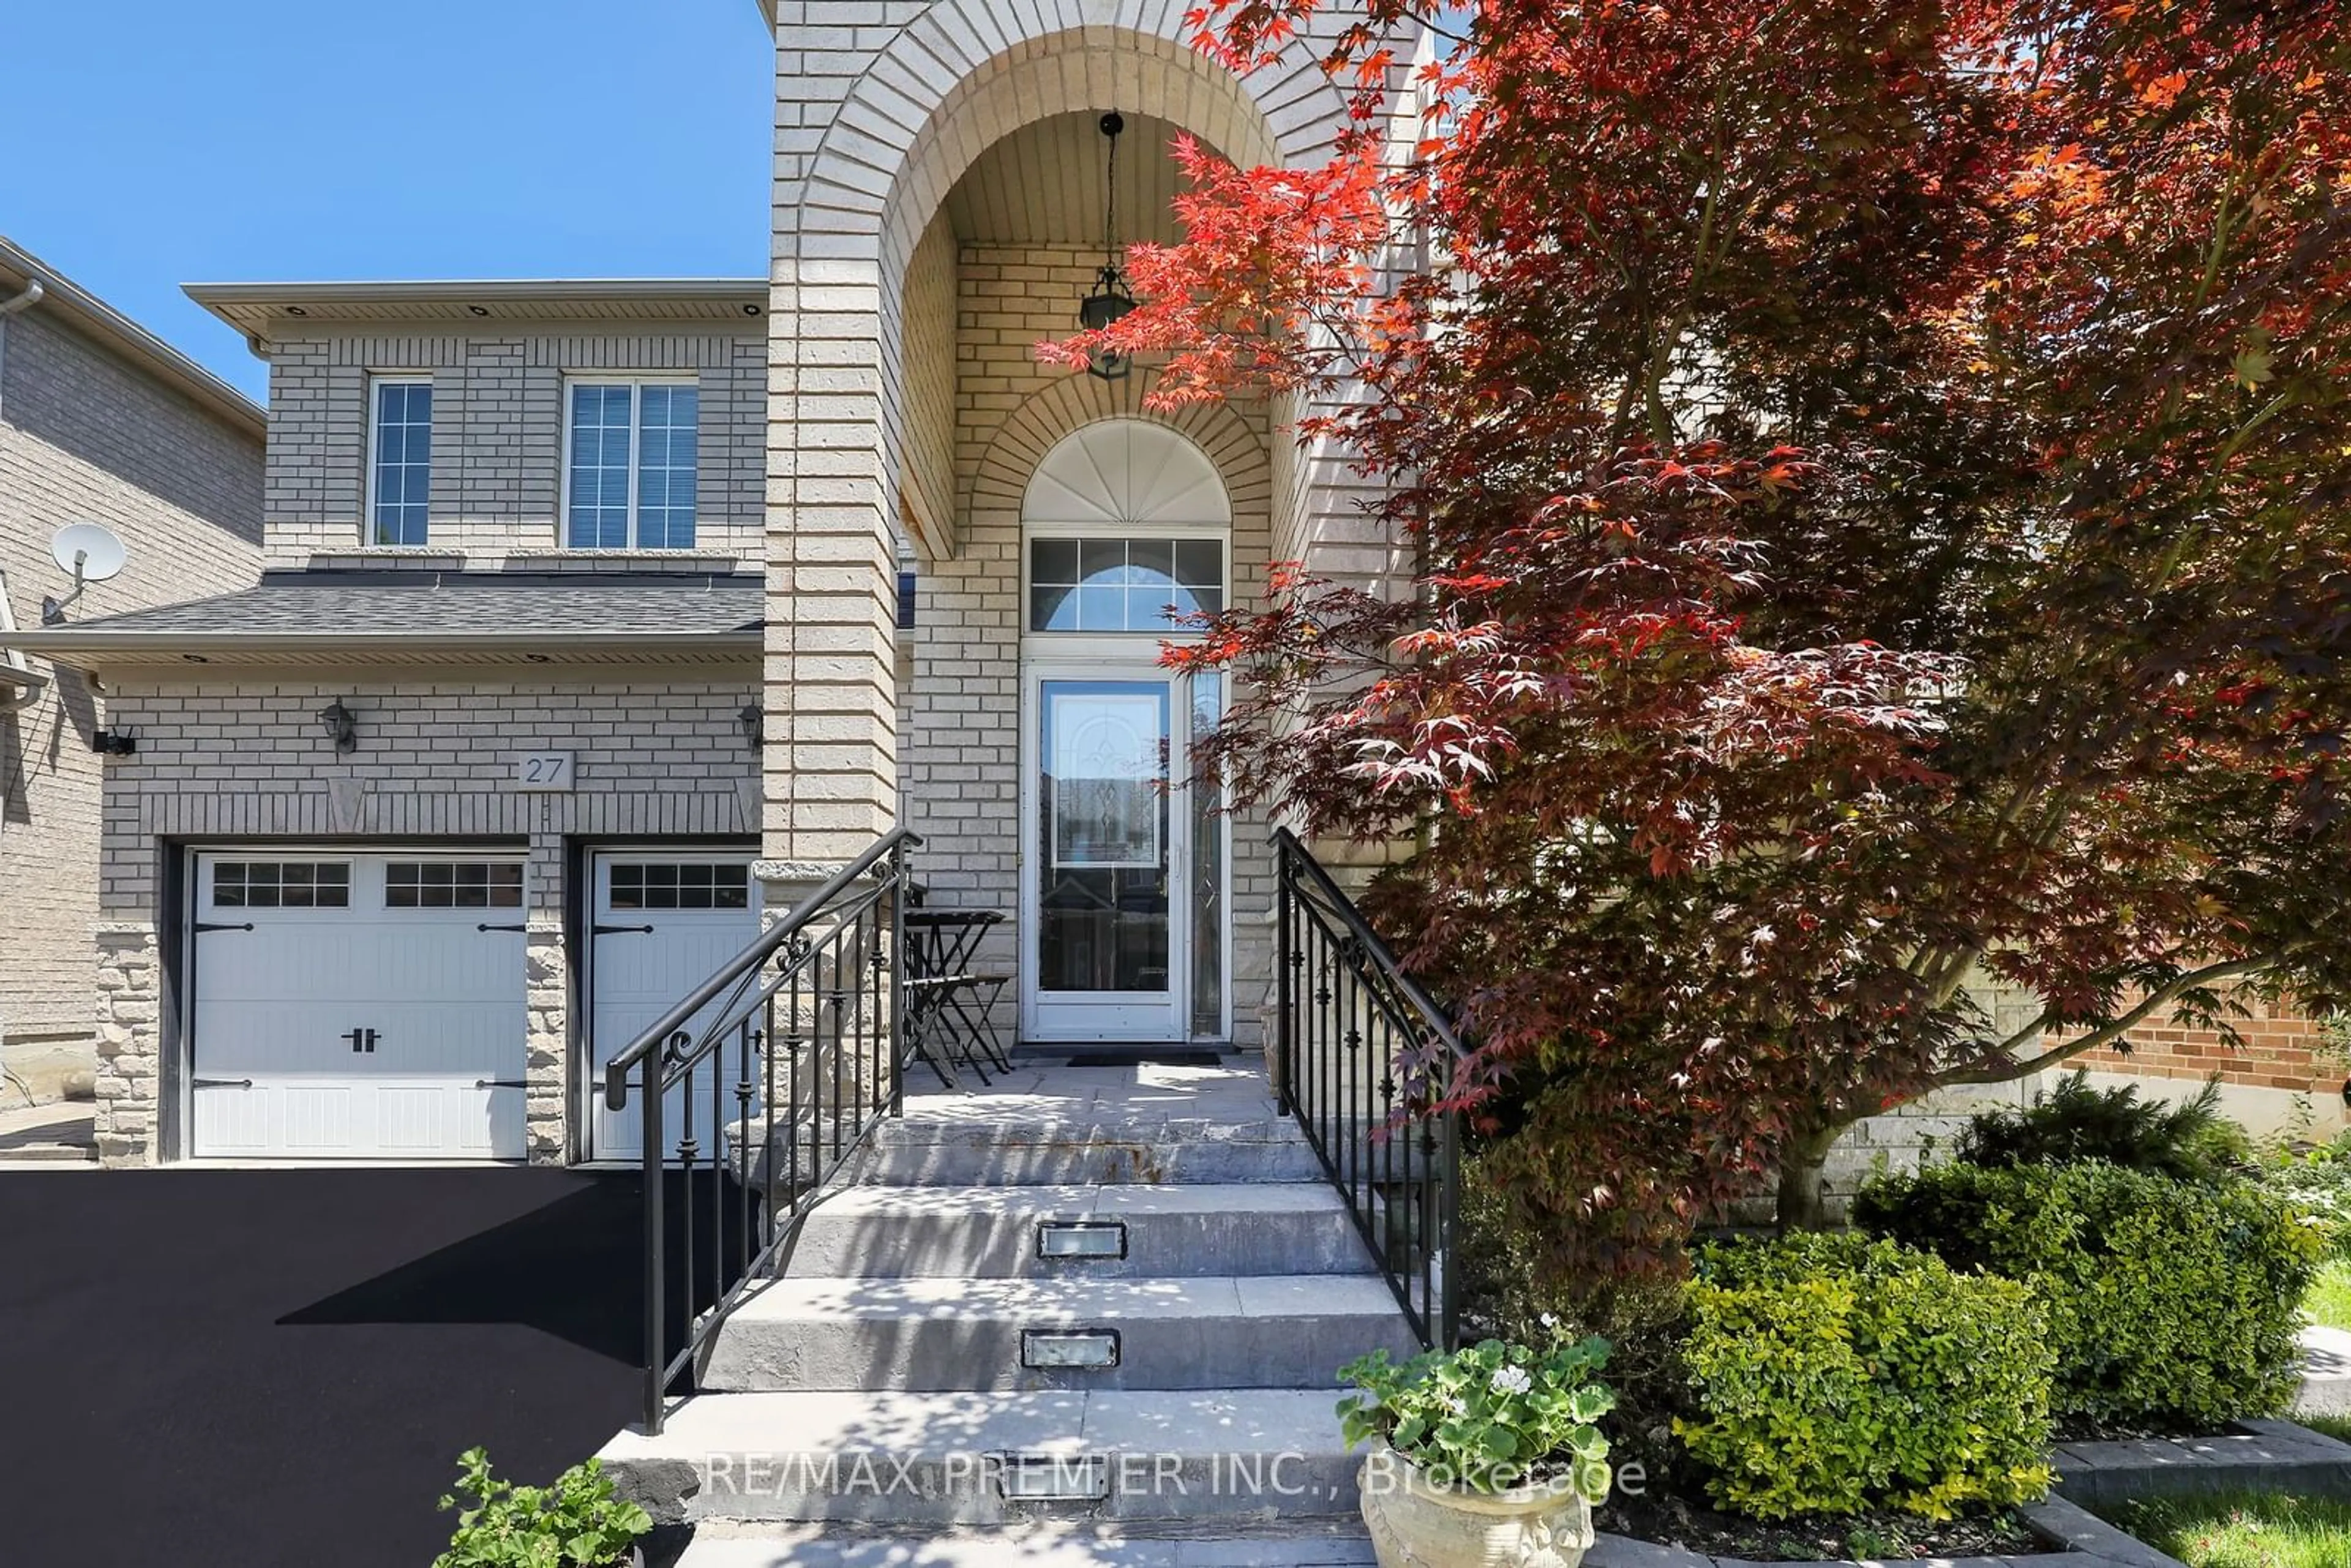 Home with brick exterior material for 27 Giovanni Way, Vaughan Ontario L4H 1R7